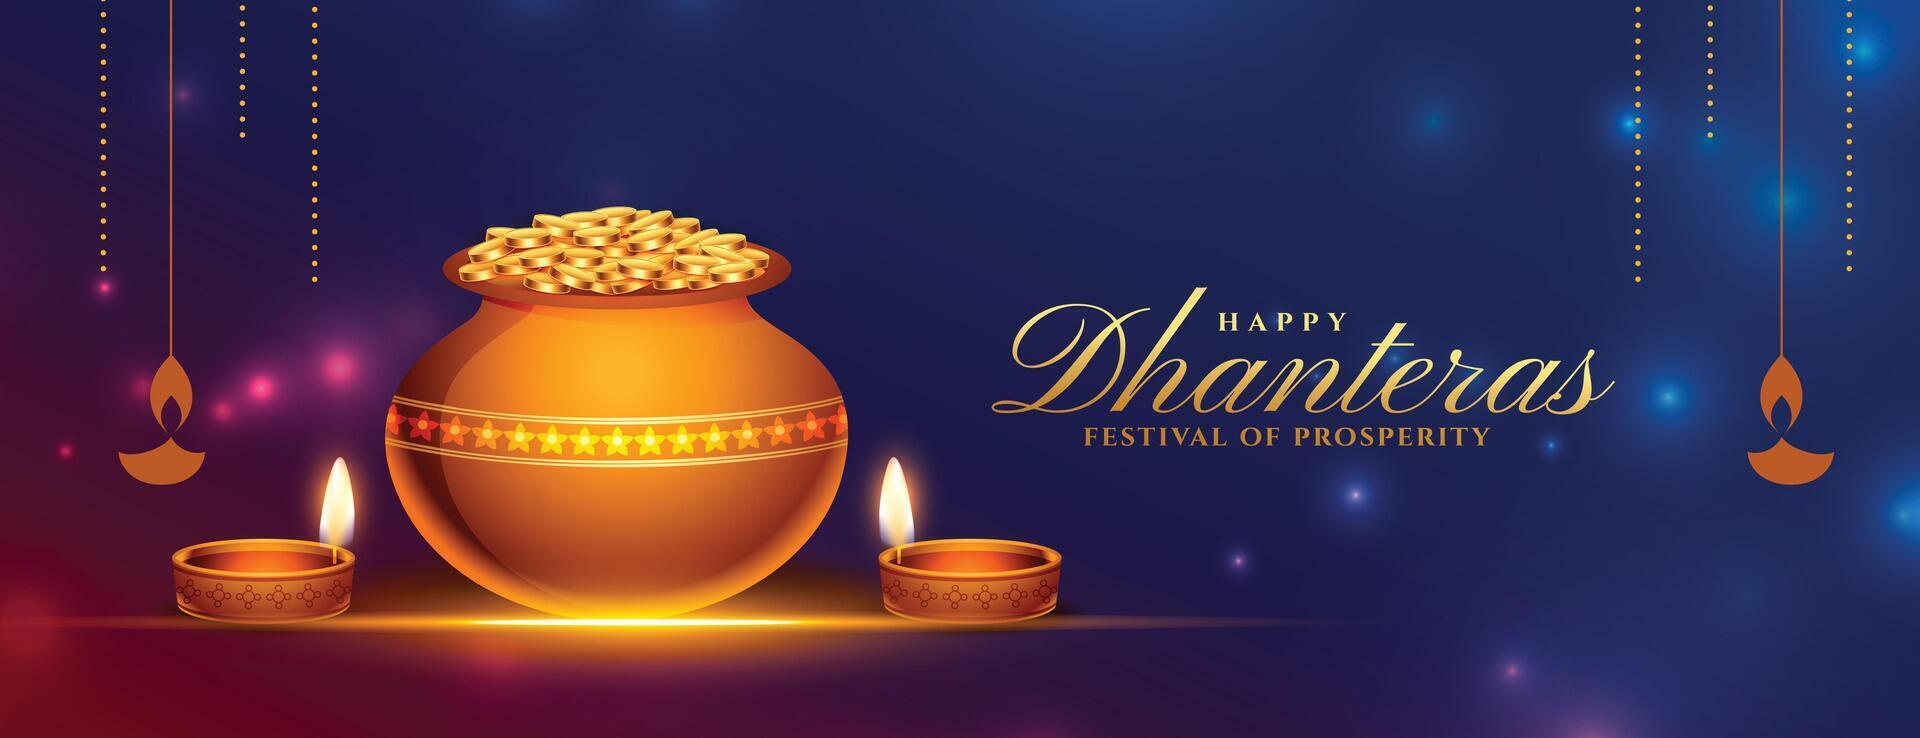 happy dhanteras decorative poster for laxmi puja and prosperity vector